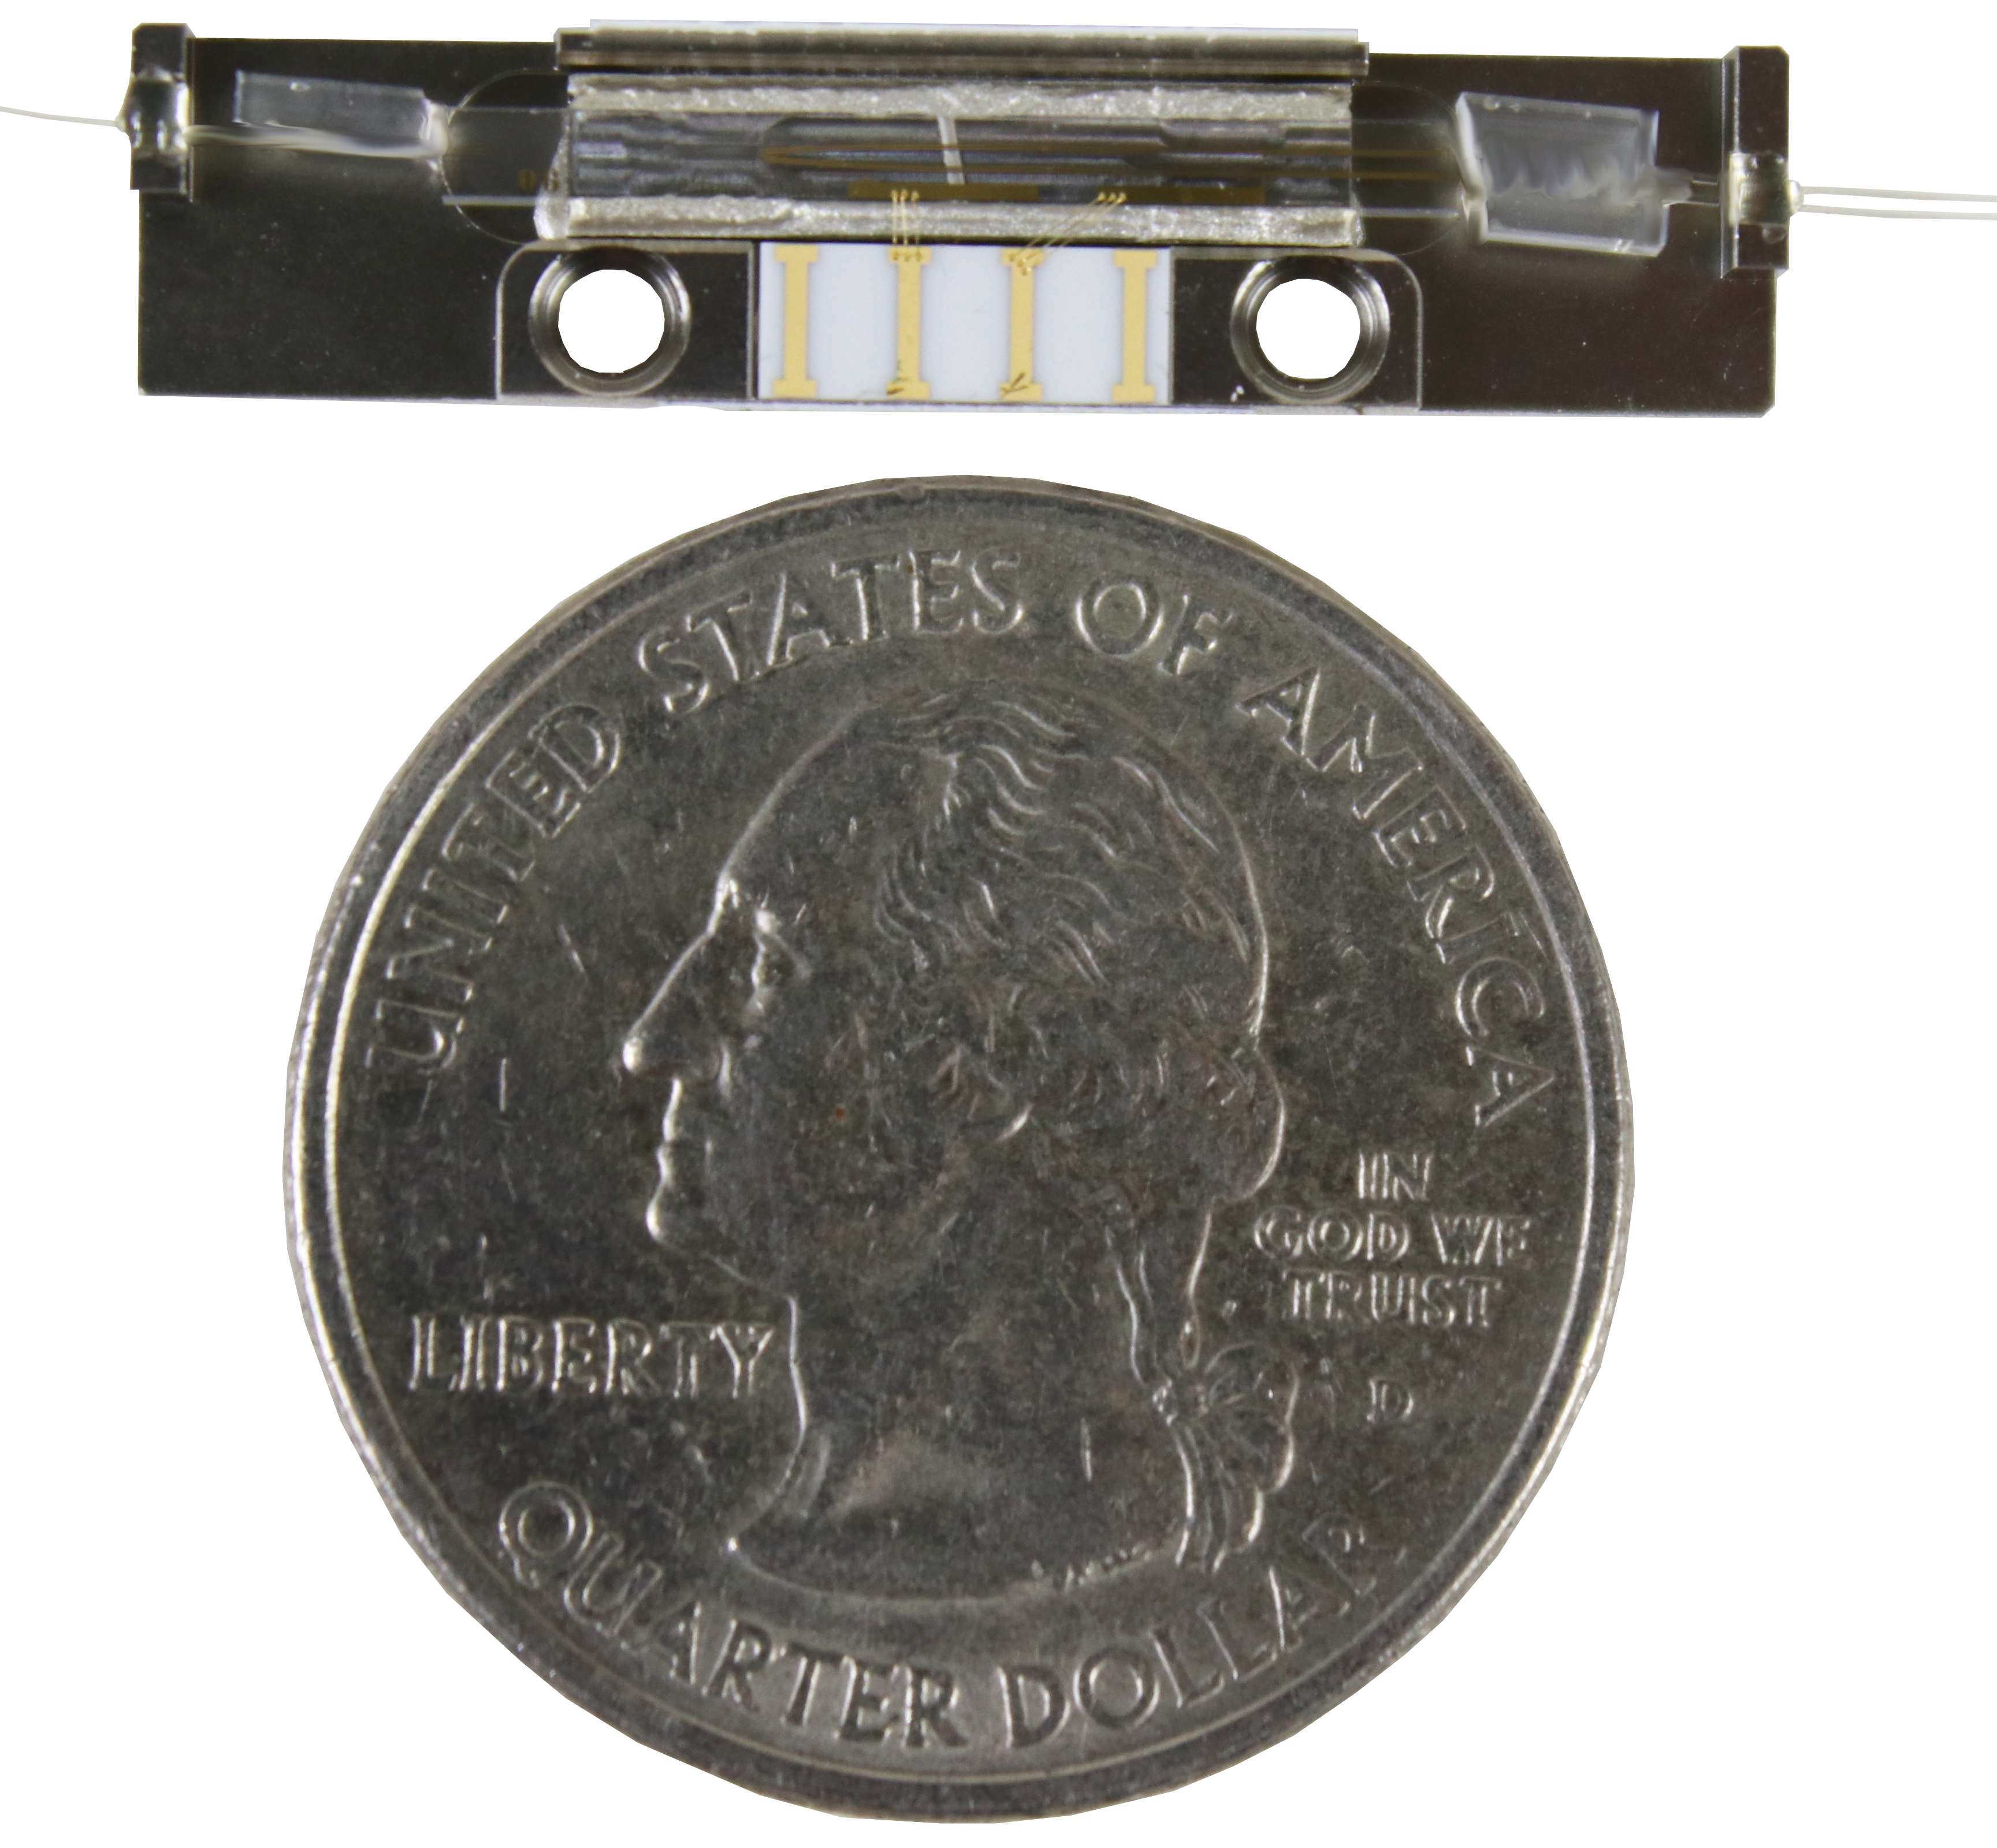 Multi-functional Integrated Optical Chip Submount, 1550 nm, 18 mm Chip Length, w/ PM Fiber Pigtails